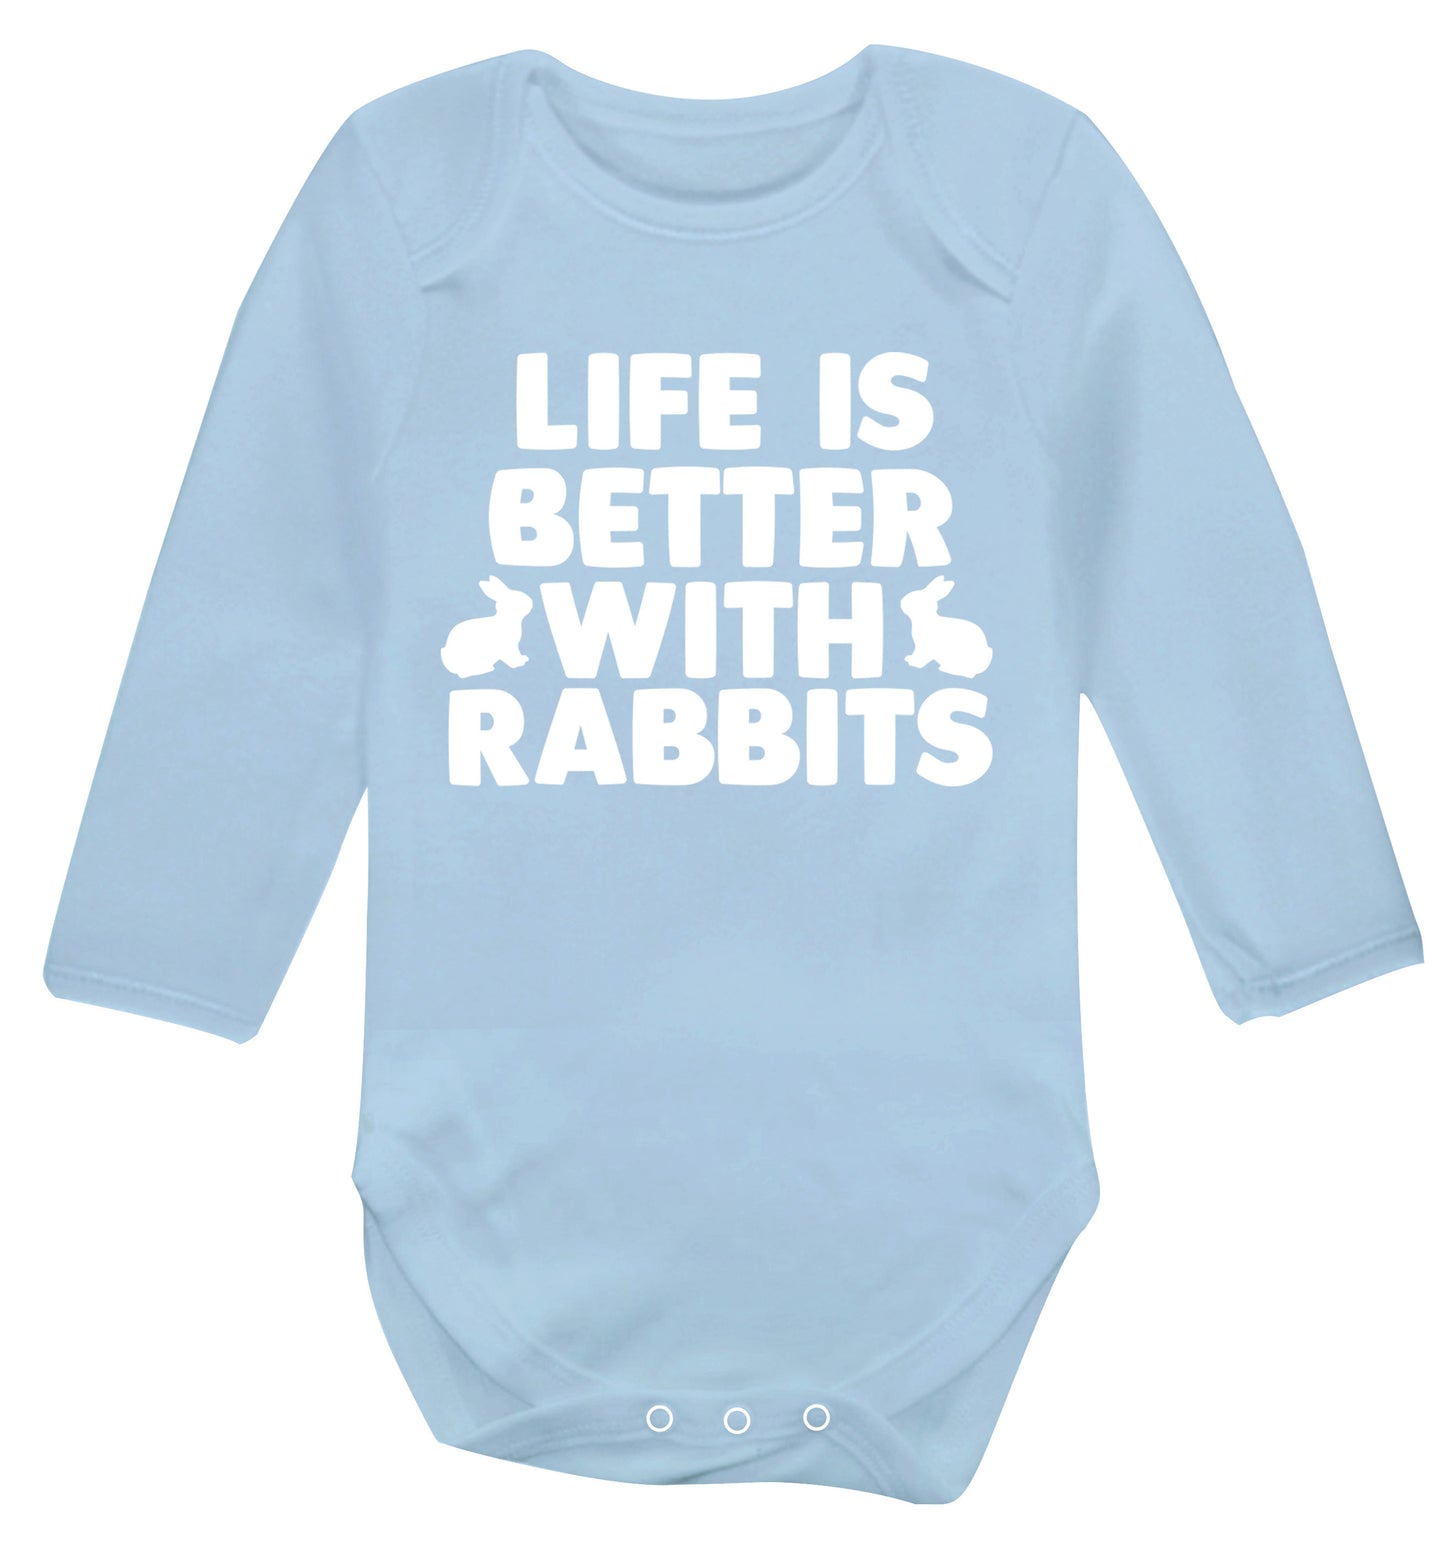 Life is better with rabbits Baby Vest long sleeved pale blue 6-12 months